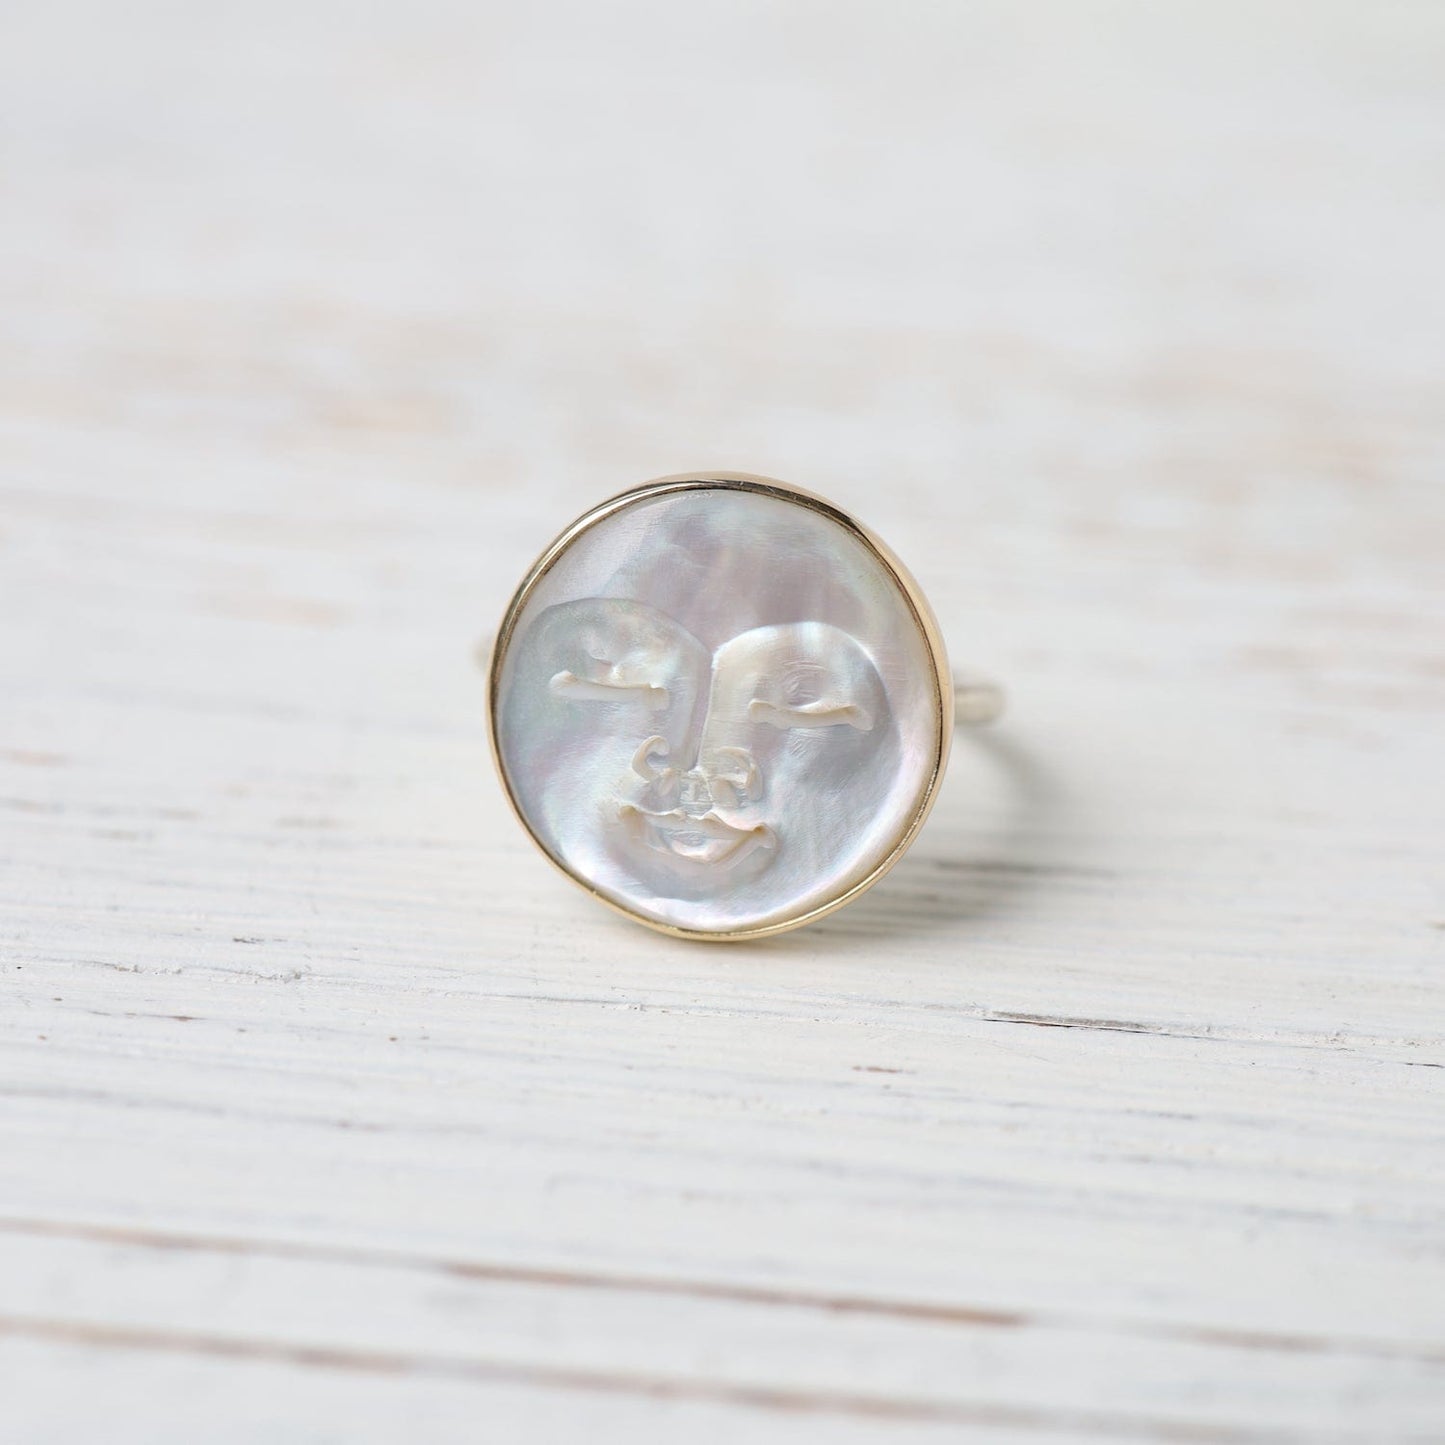 RNG-14K Lunarian Ring - Mother of Pearl